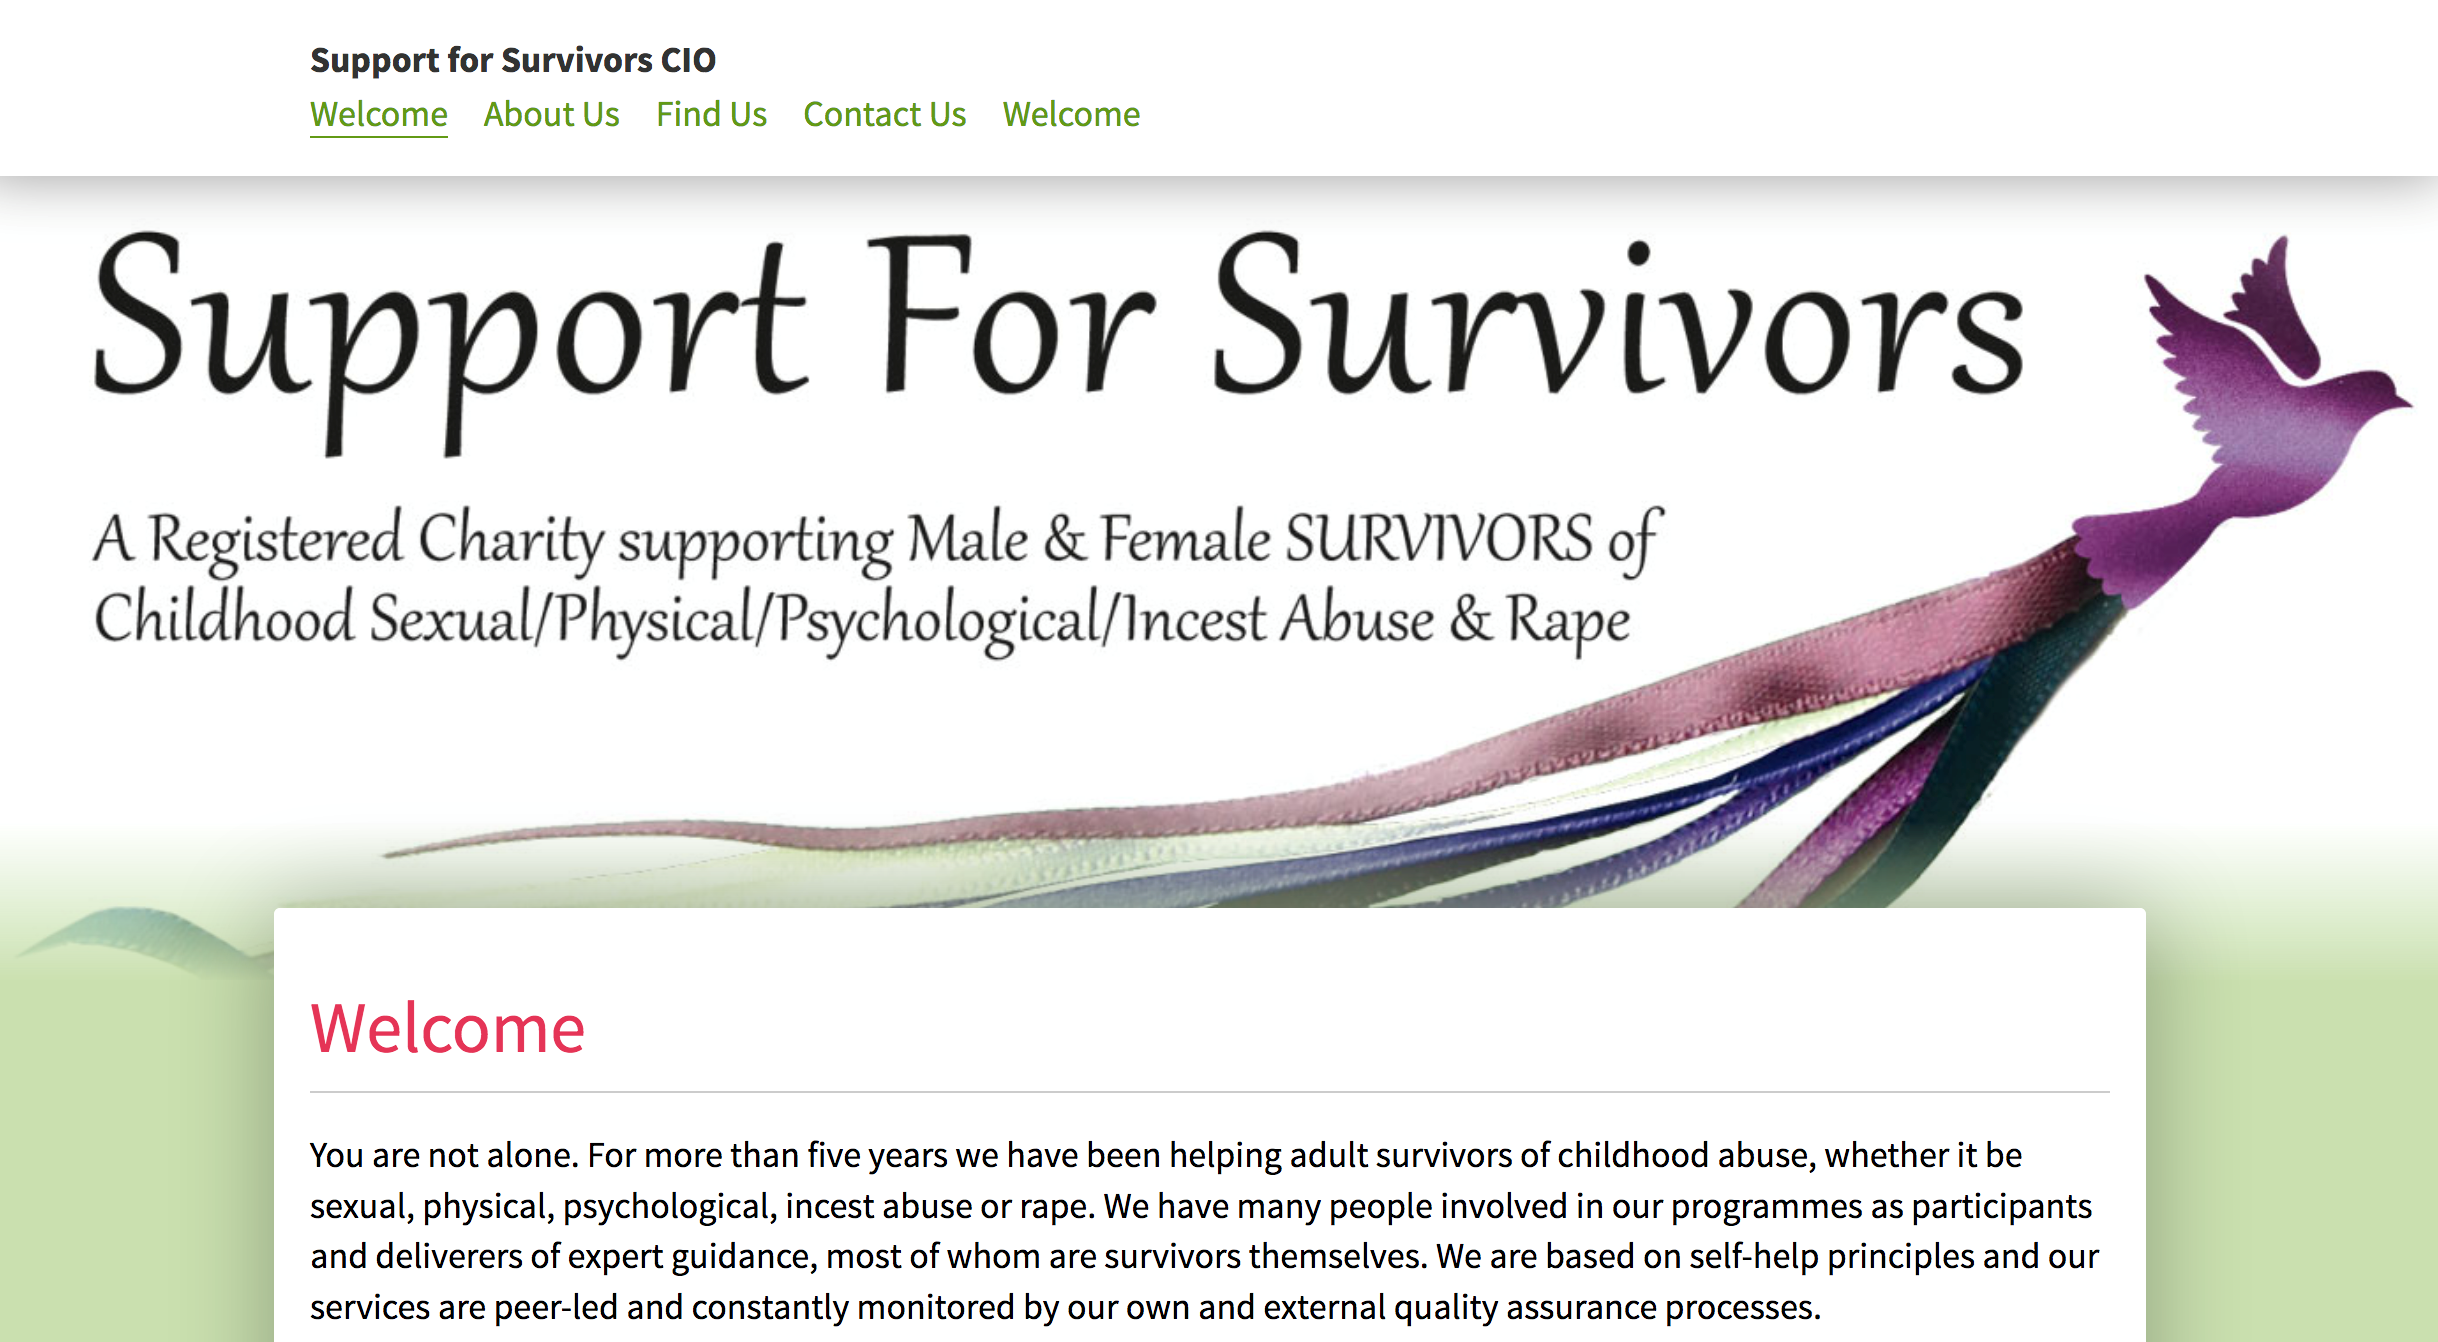 Screen shot of the support for survivors website